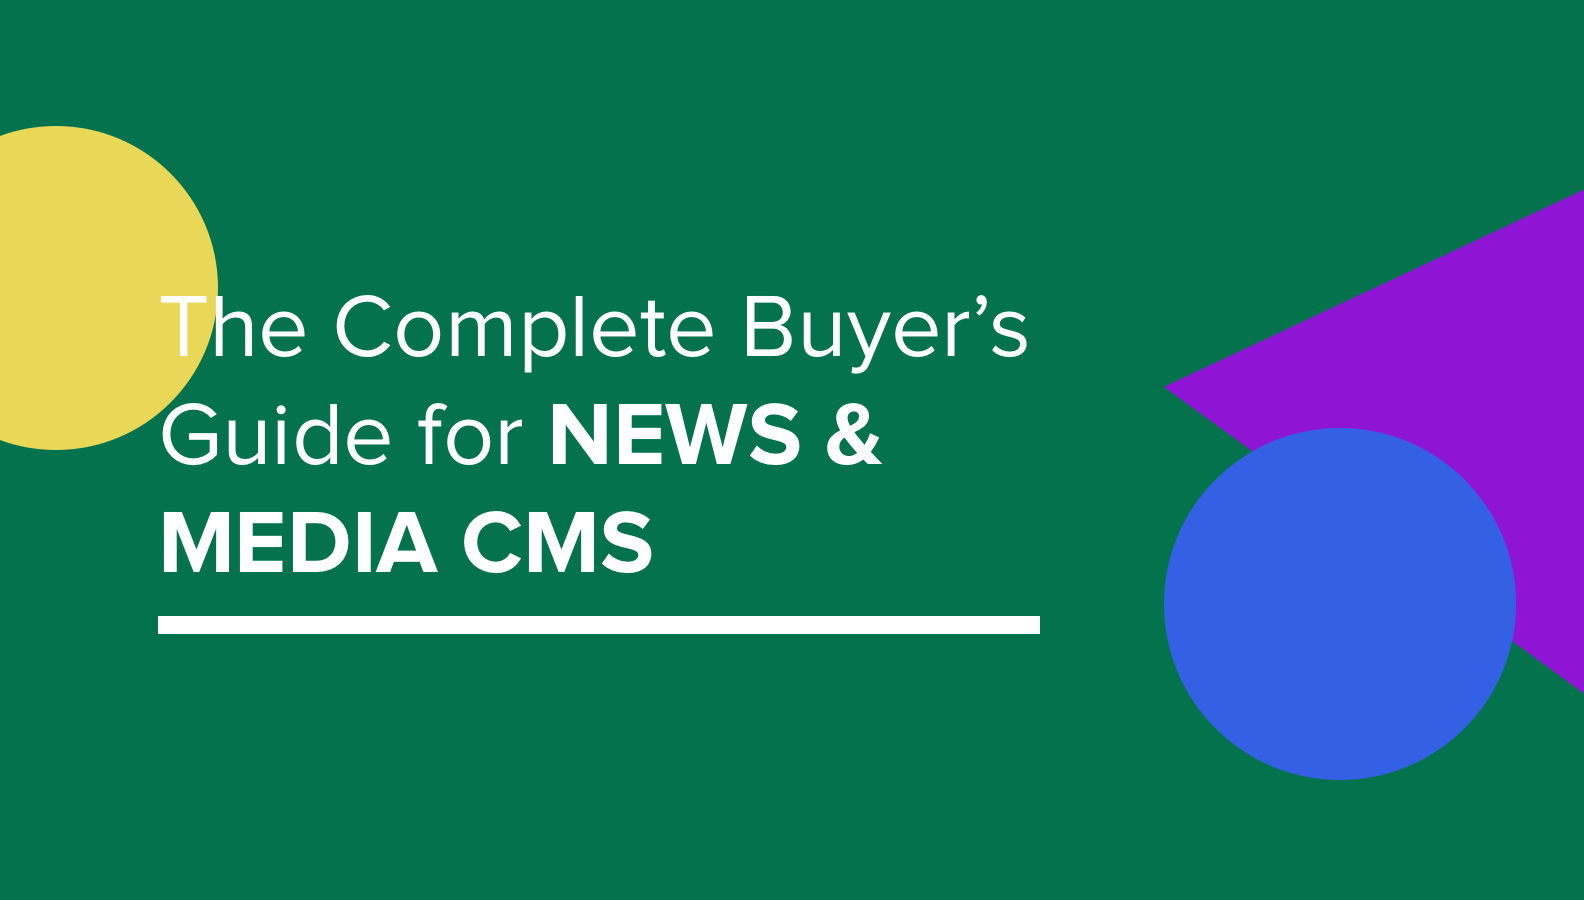 The complete buyer's guide for news and media cms banner